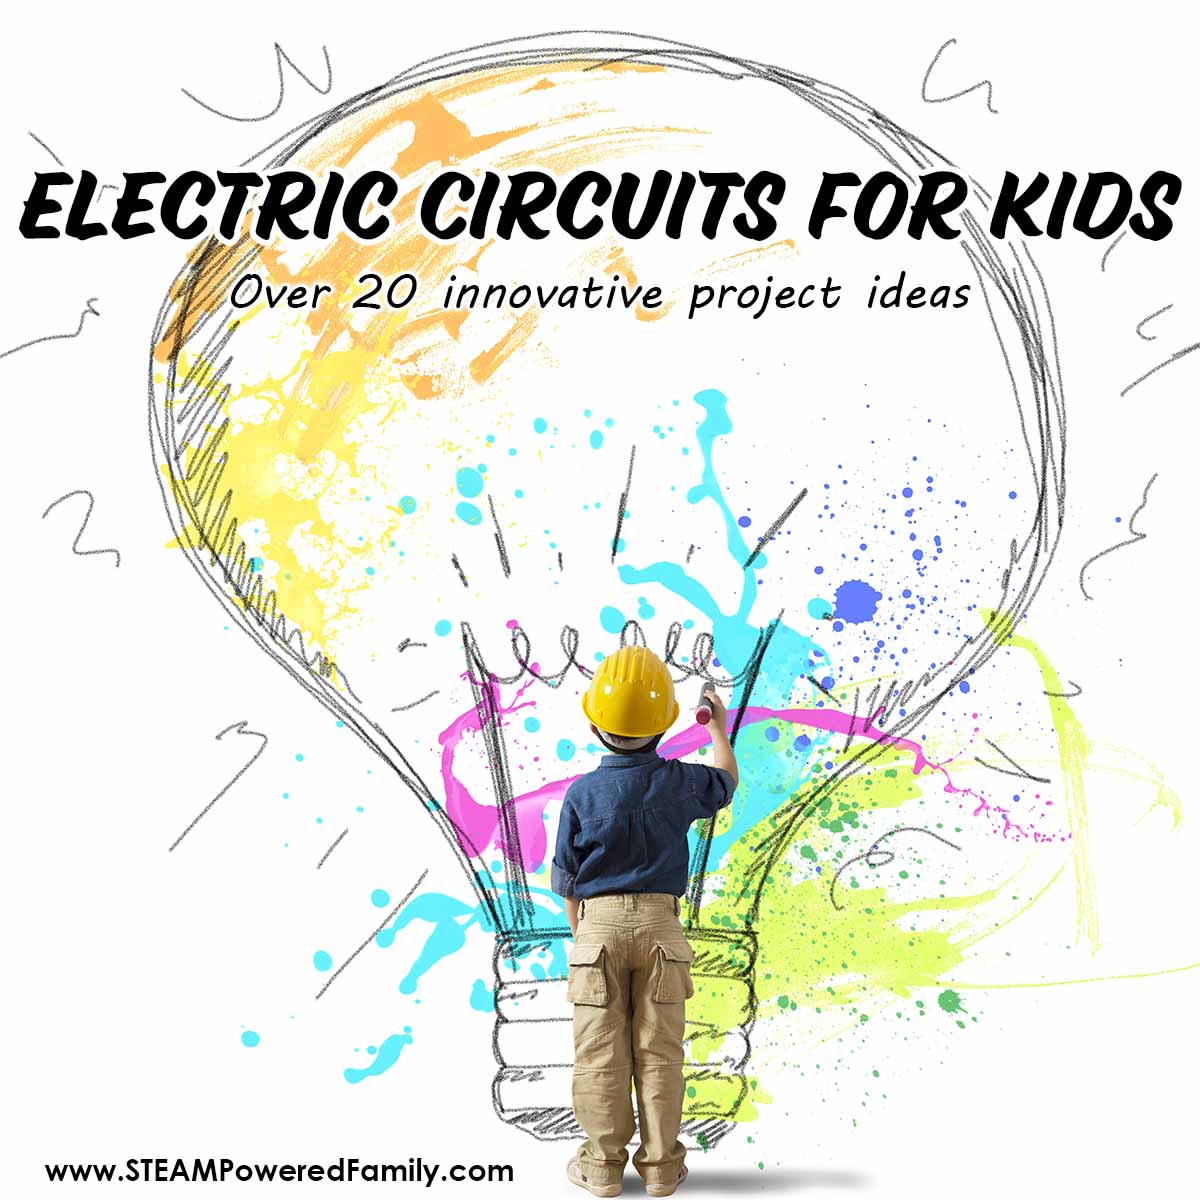 Electric Circuits for Kids